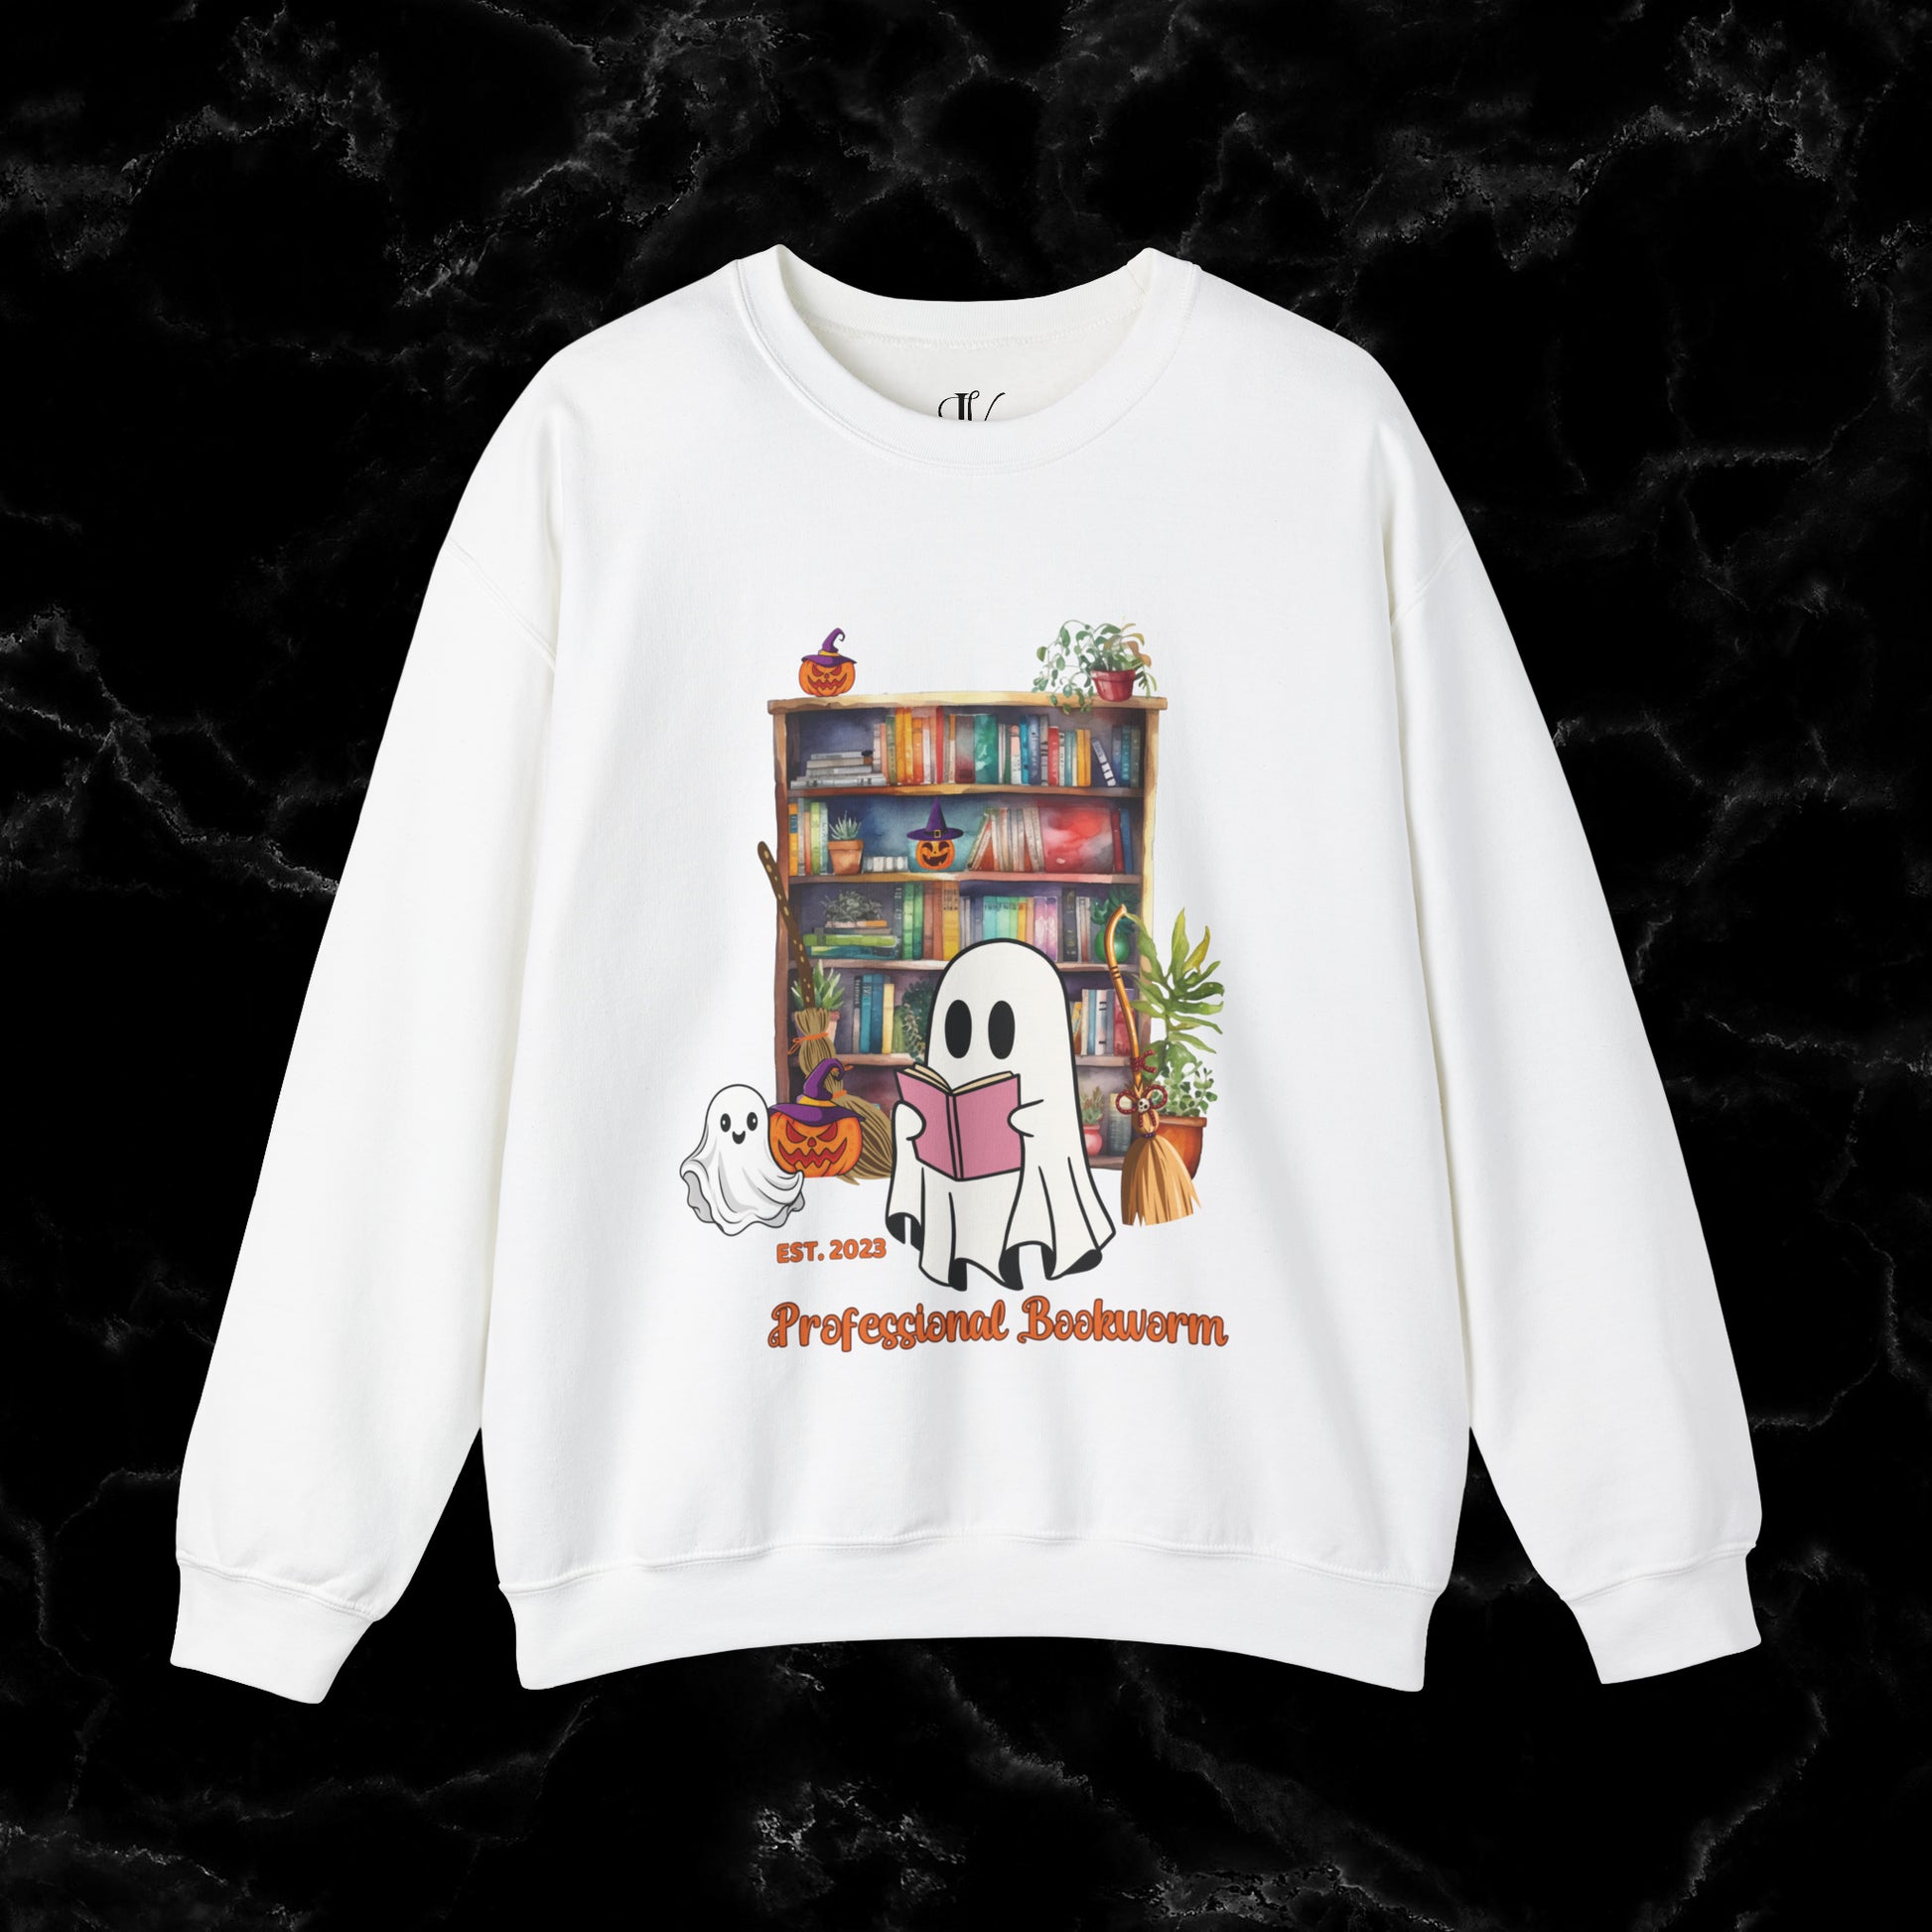 Witchy Gifts for Book Lover Cottagecore Pumpkin Witch Sweatshirt - Bookworm Back To School Reading Fall Sweater, Perfect Present for Bookworm Aunt's Birthday Sweatshirt S White 